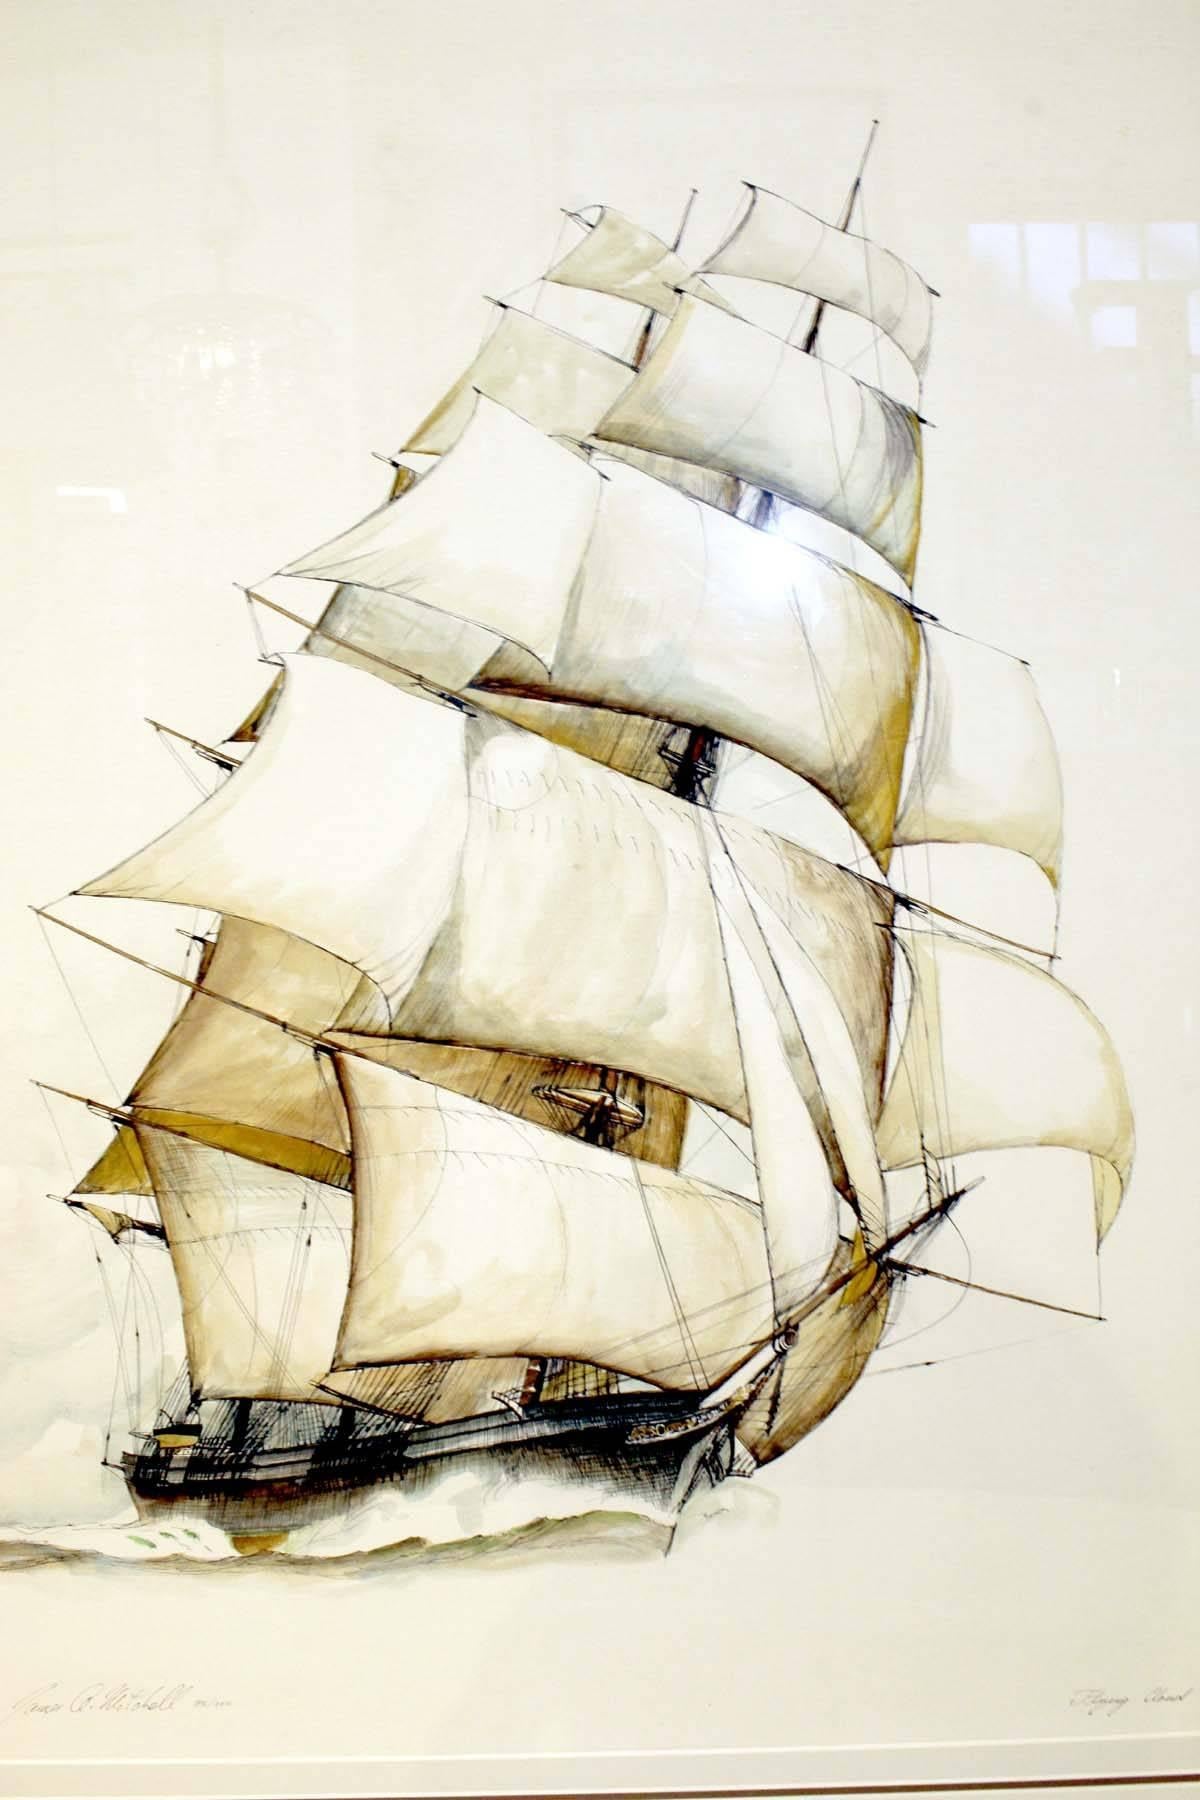 A beautiful poetic image #98/200 this majestic ship is captured under full wind in her sails. Flying Cloud was a clipper ship that set the world's sailing record for the fastest passage between New York and San Francisco, 89 days 8 hours. The ship